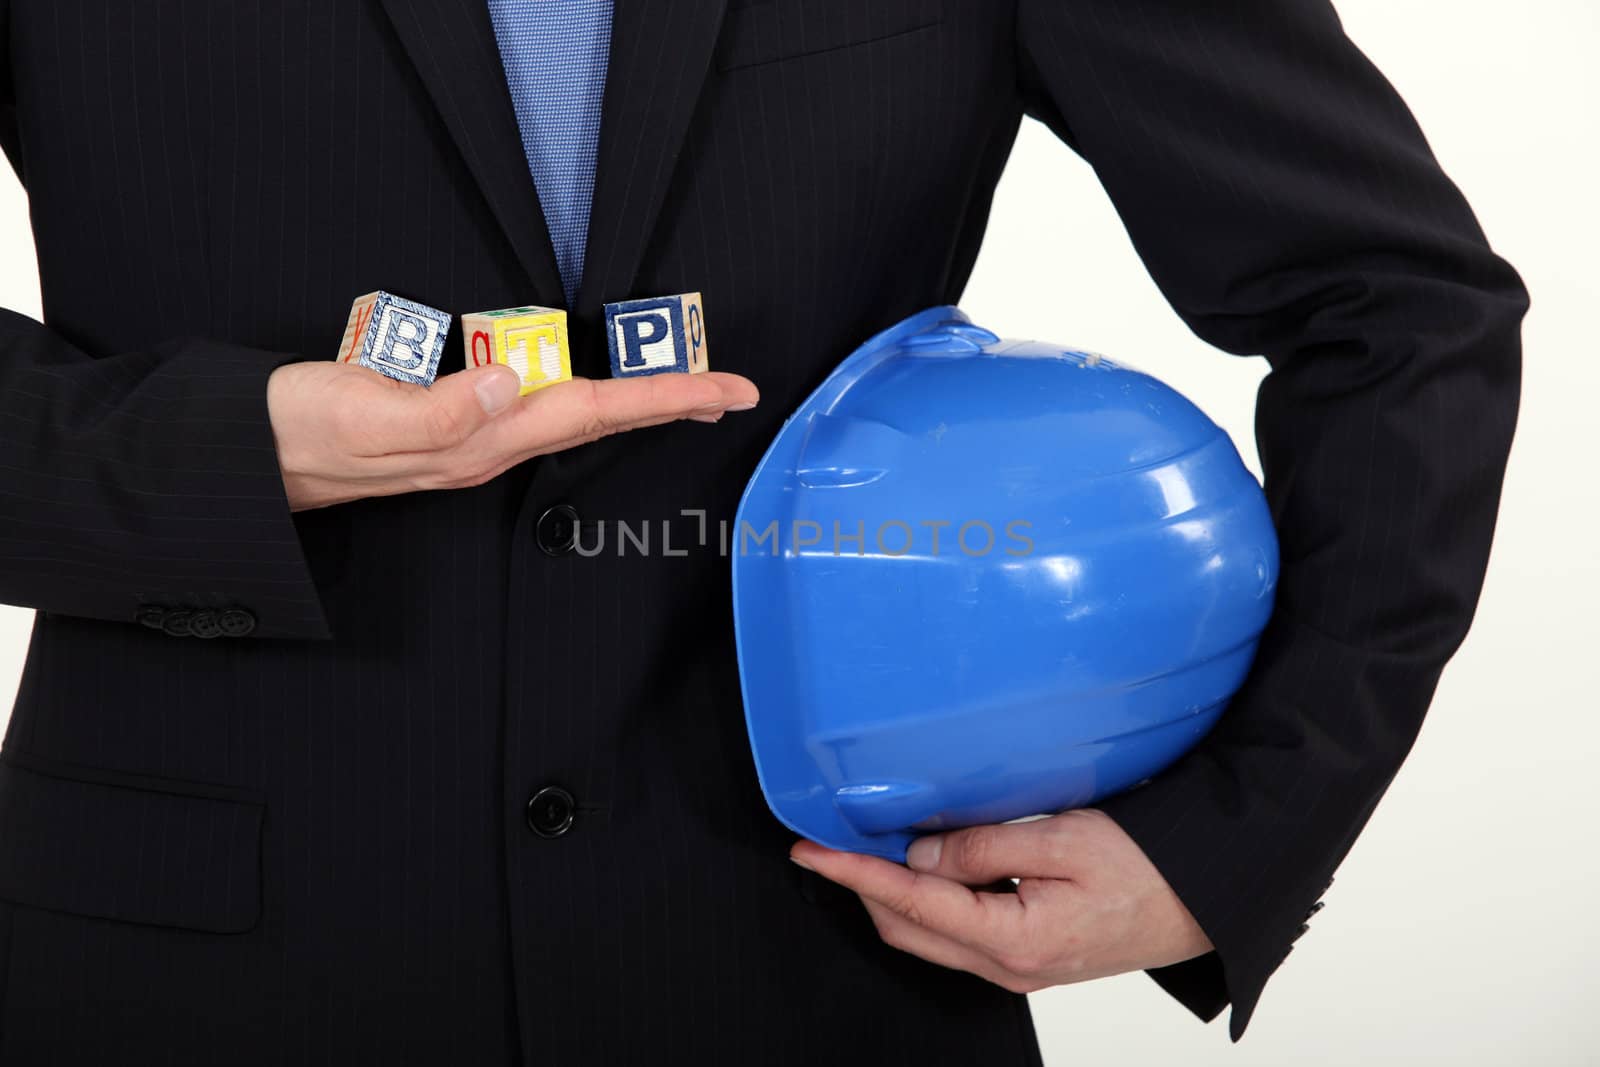 architect in suit holding hard hat